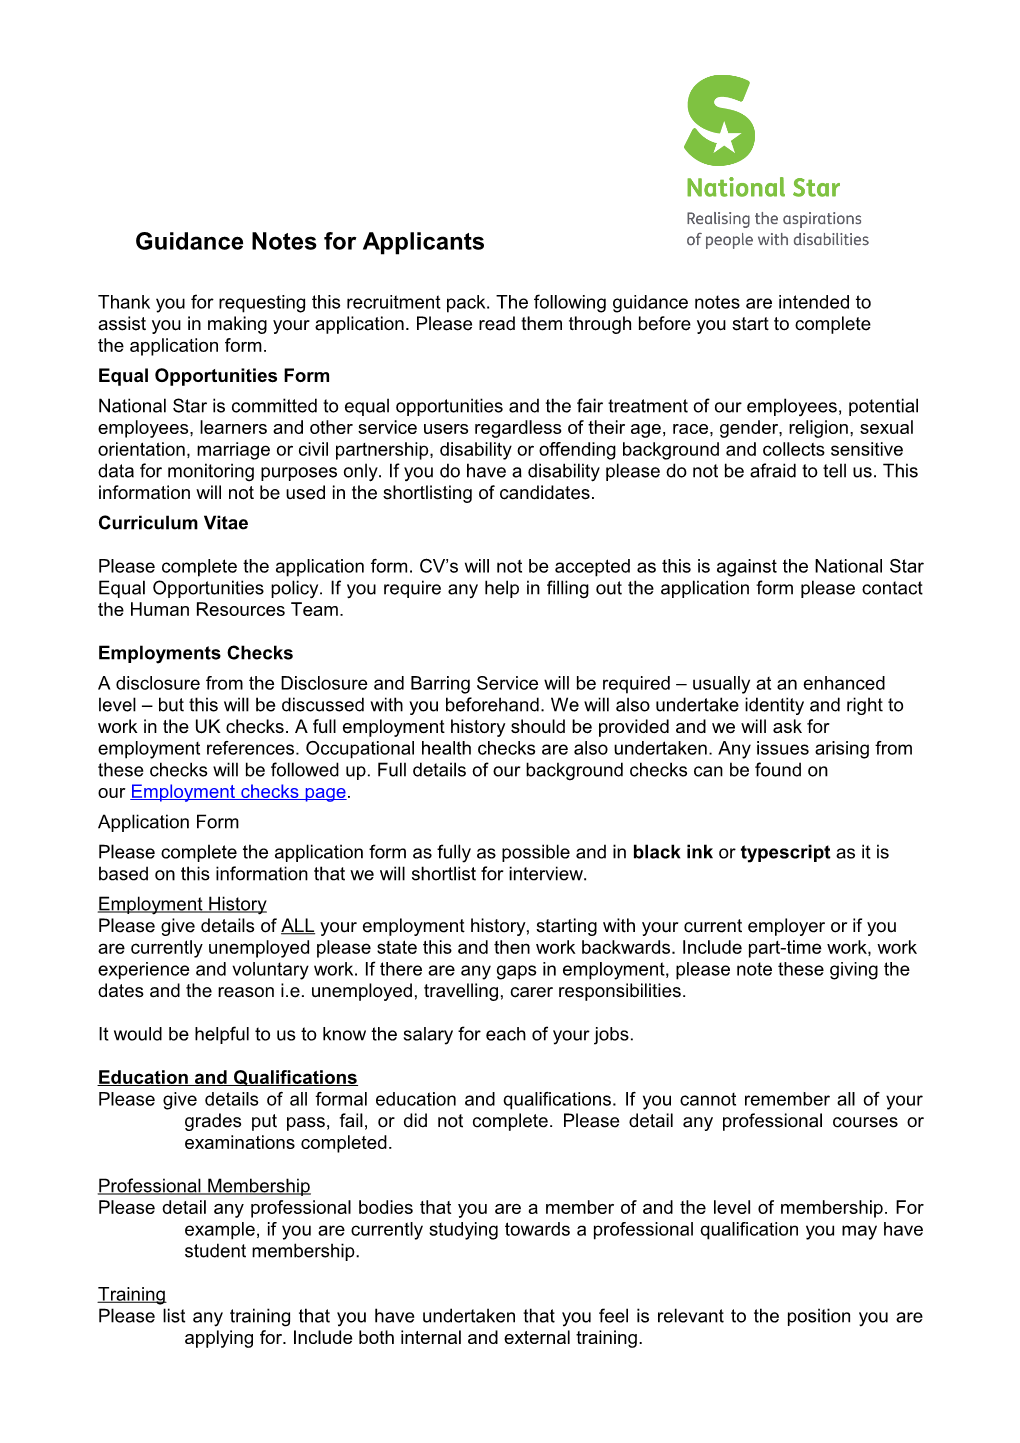 Guidance Notes for Completing Your Application